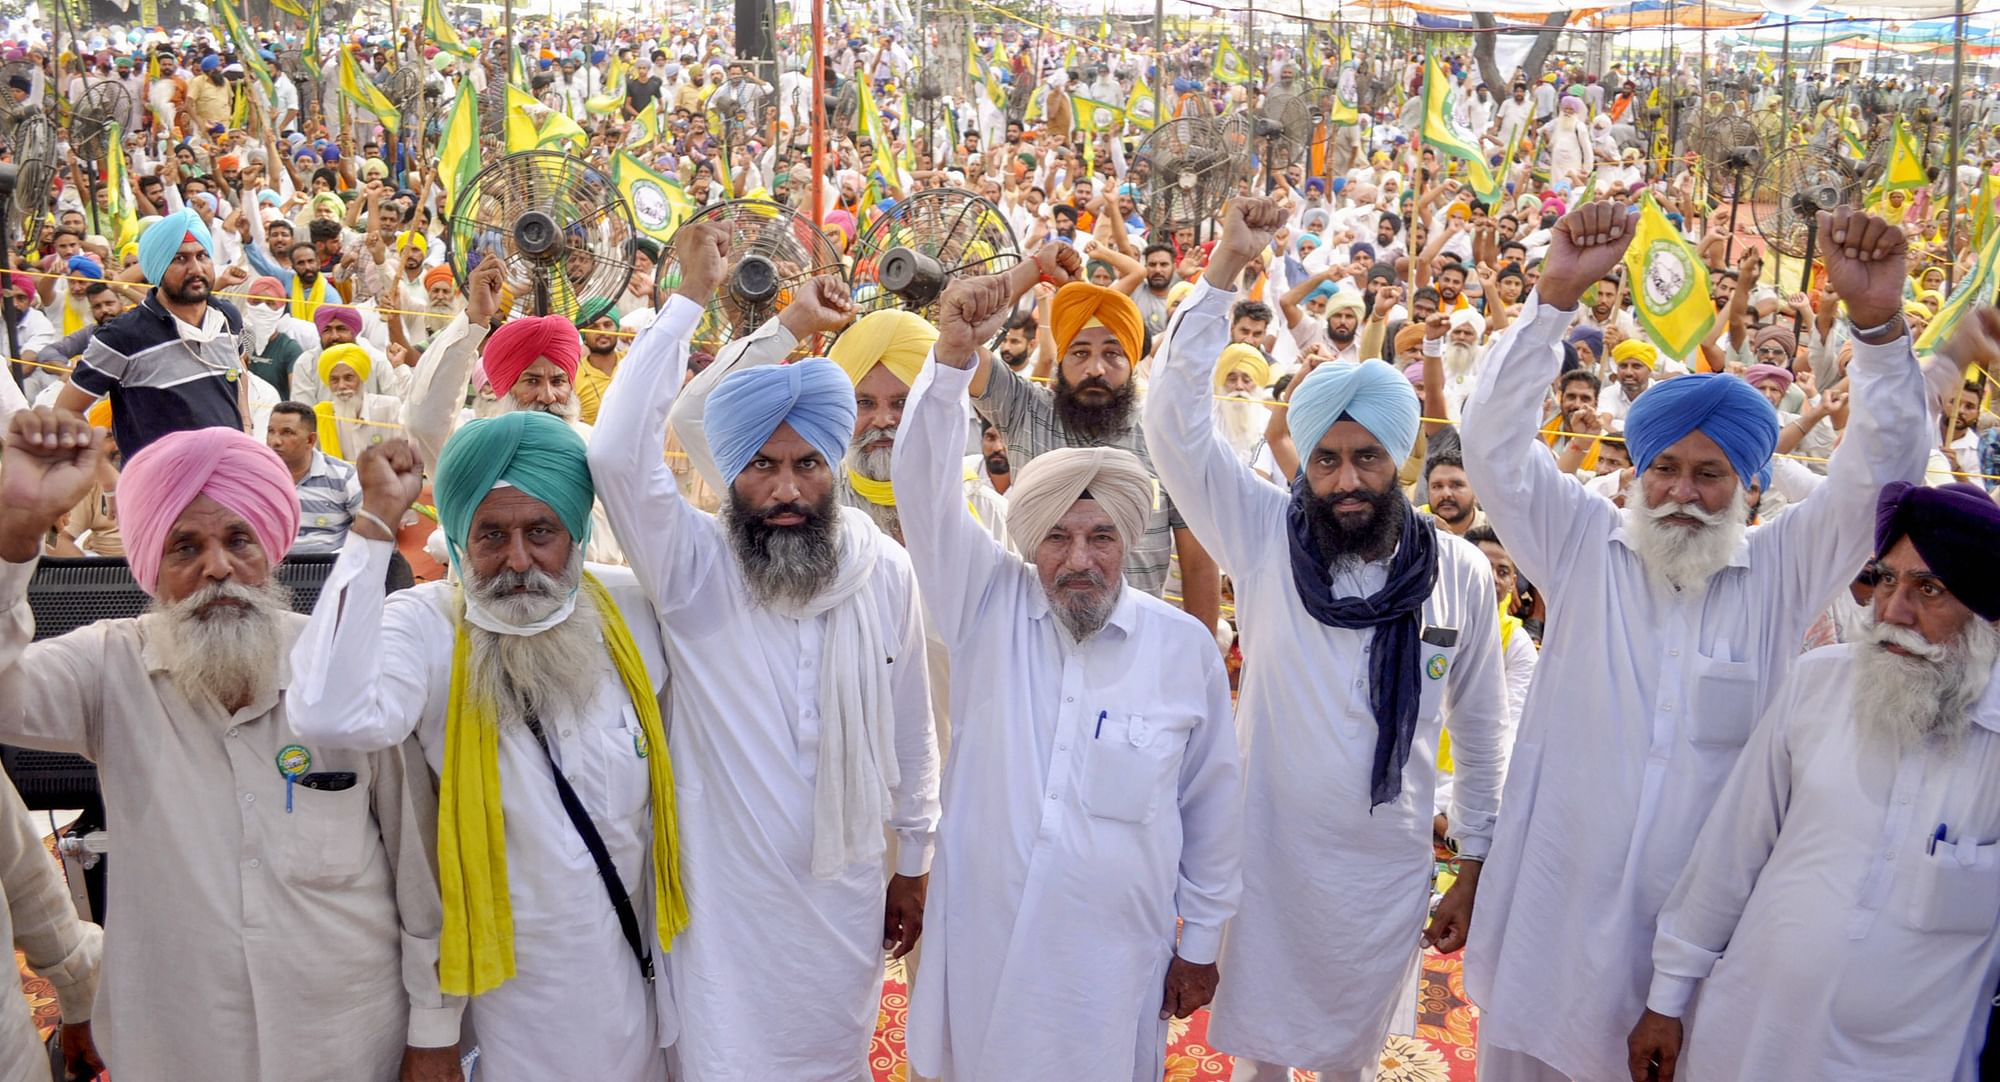 Representatives of various farmers organisations stage a protest against the Central Government over agriculture related issues, in Patiala. Image used for representation.